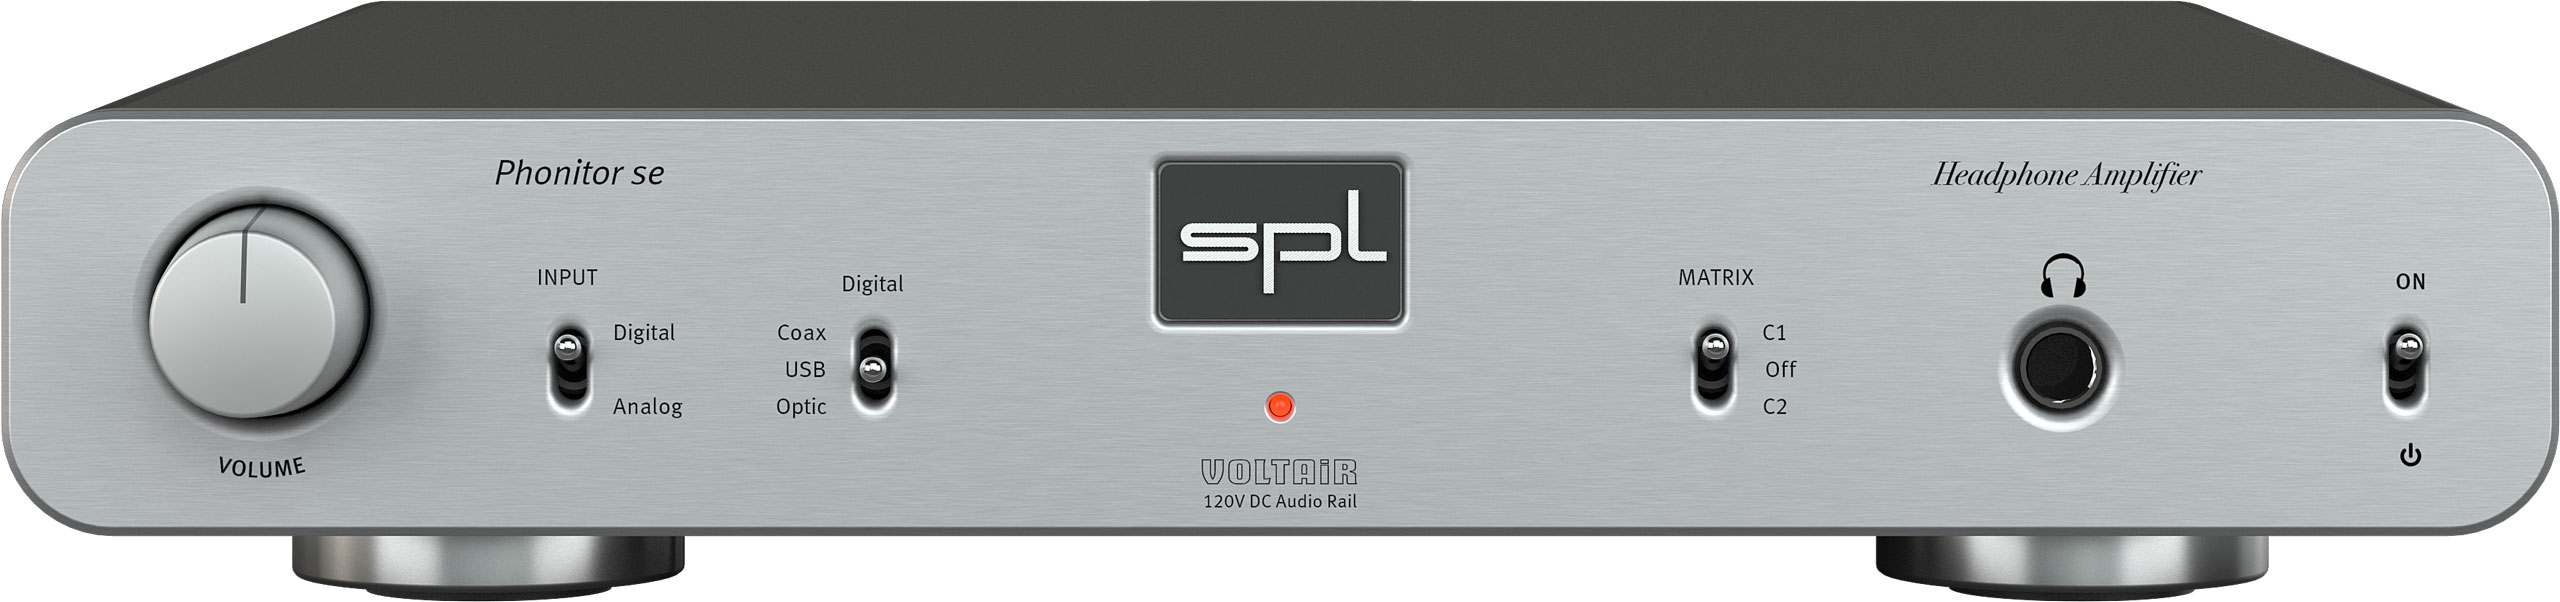 Phonitor_se_front_silver